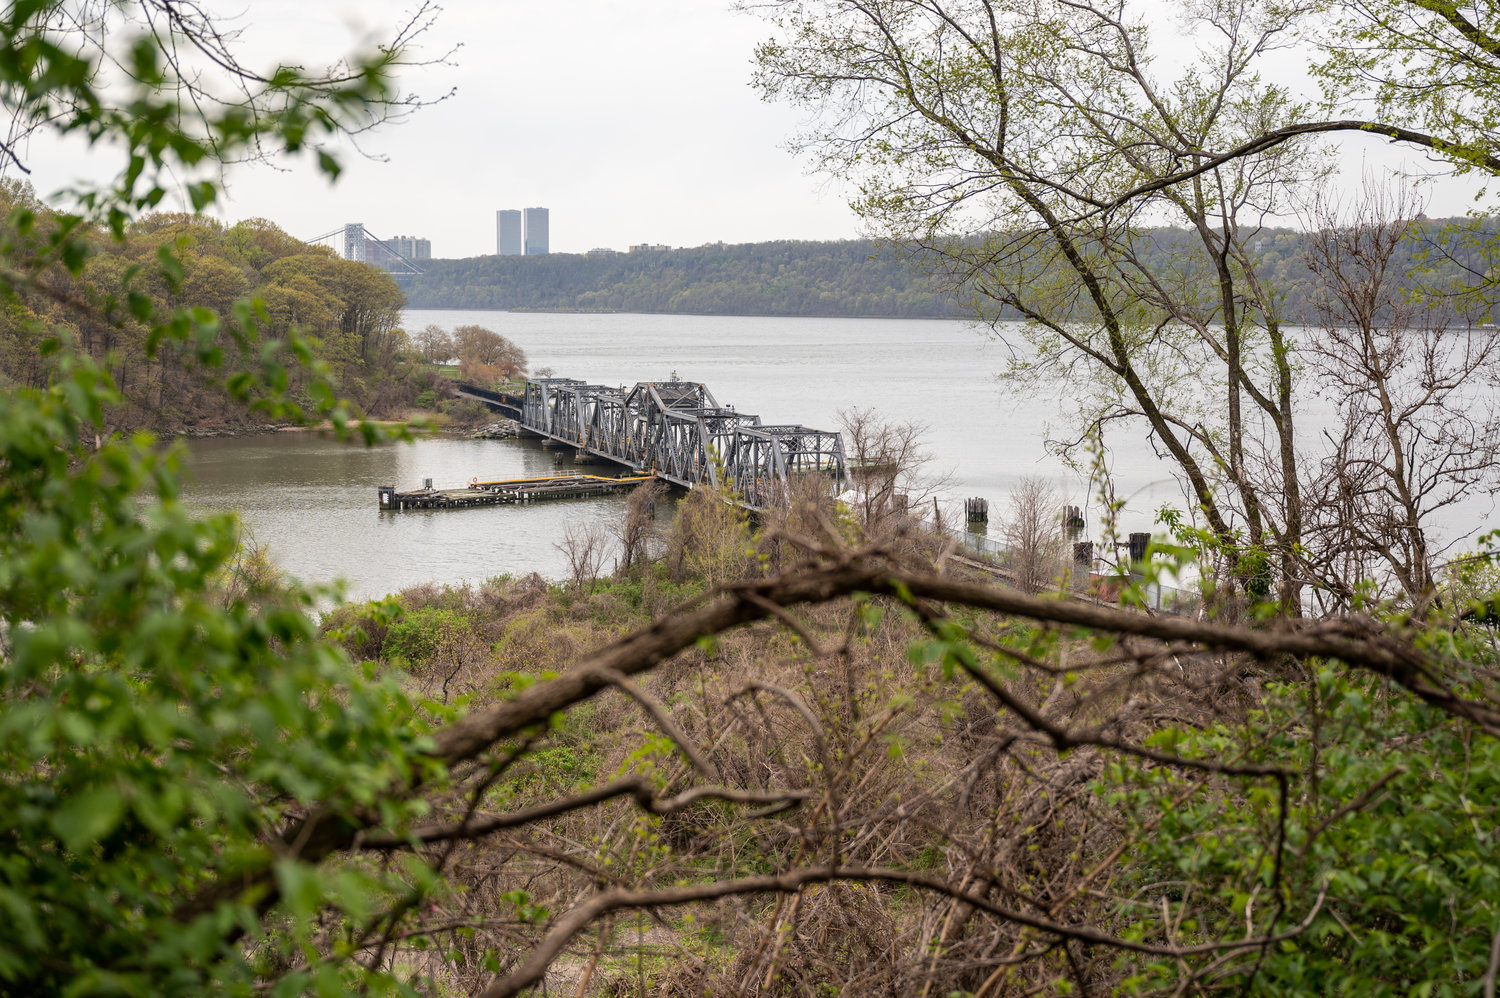 Victor San Andrés started clearing an area in the Half-Moon Overlook park last December. It’s a space with great views of the Hudson River and Spuyten Duyvil Bridge. That space is now what he calls the ‘Halve Maan Garden,’ which he hopes will be opened to his neighbors soon.